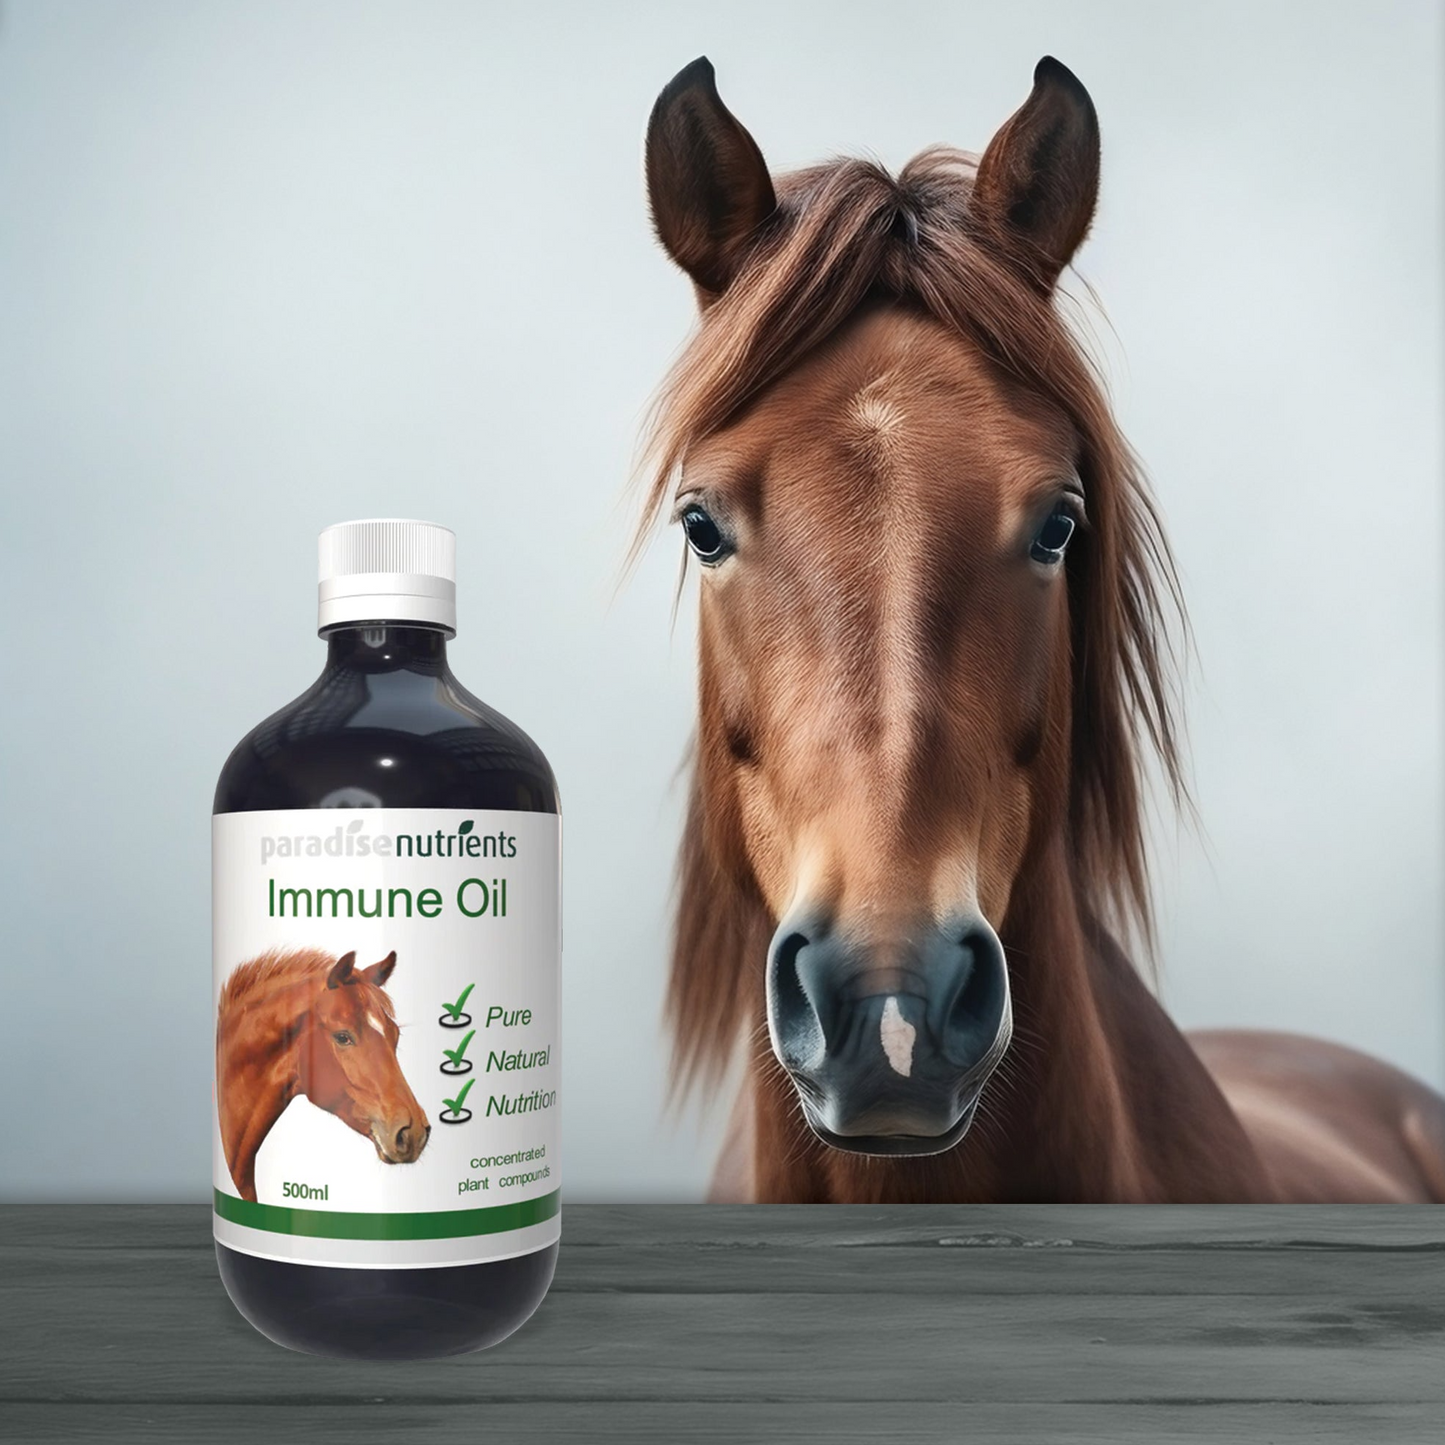 Horse Immune Oil - Paradise Nutrients - More Than Charms